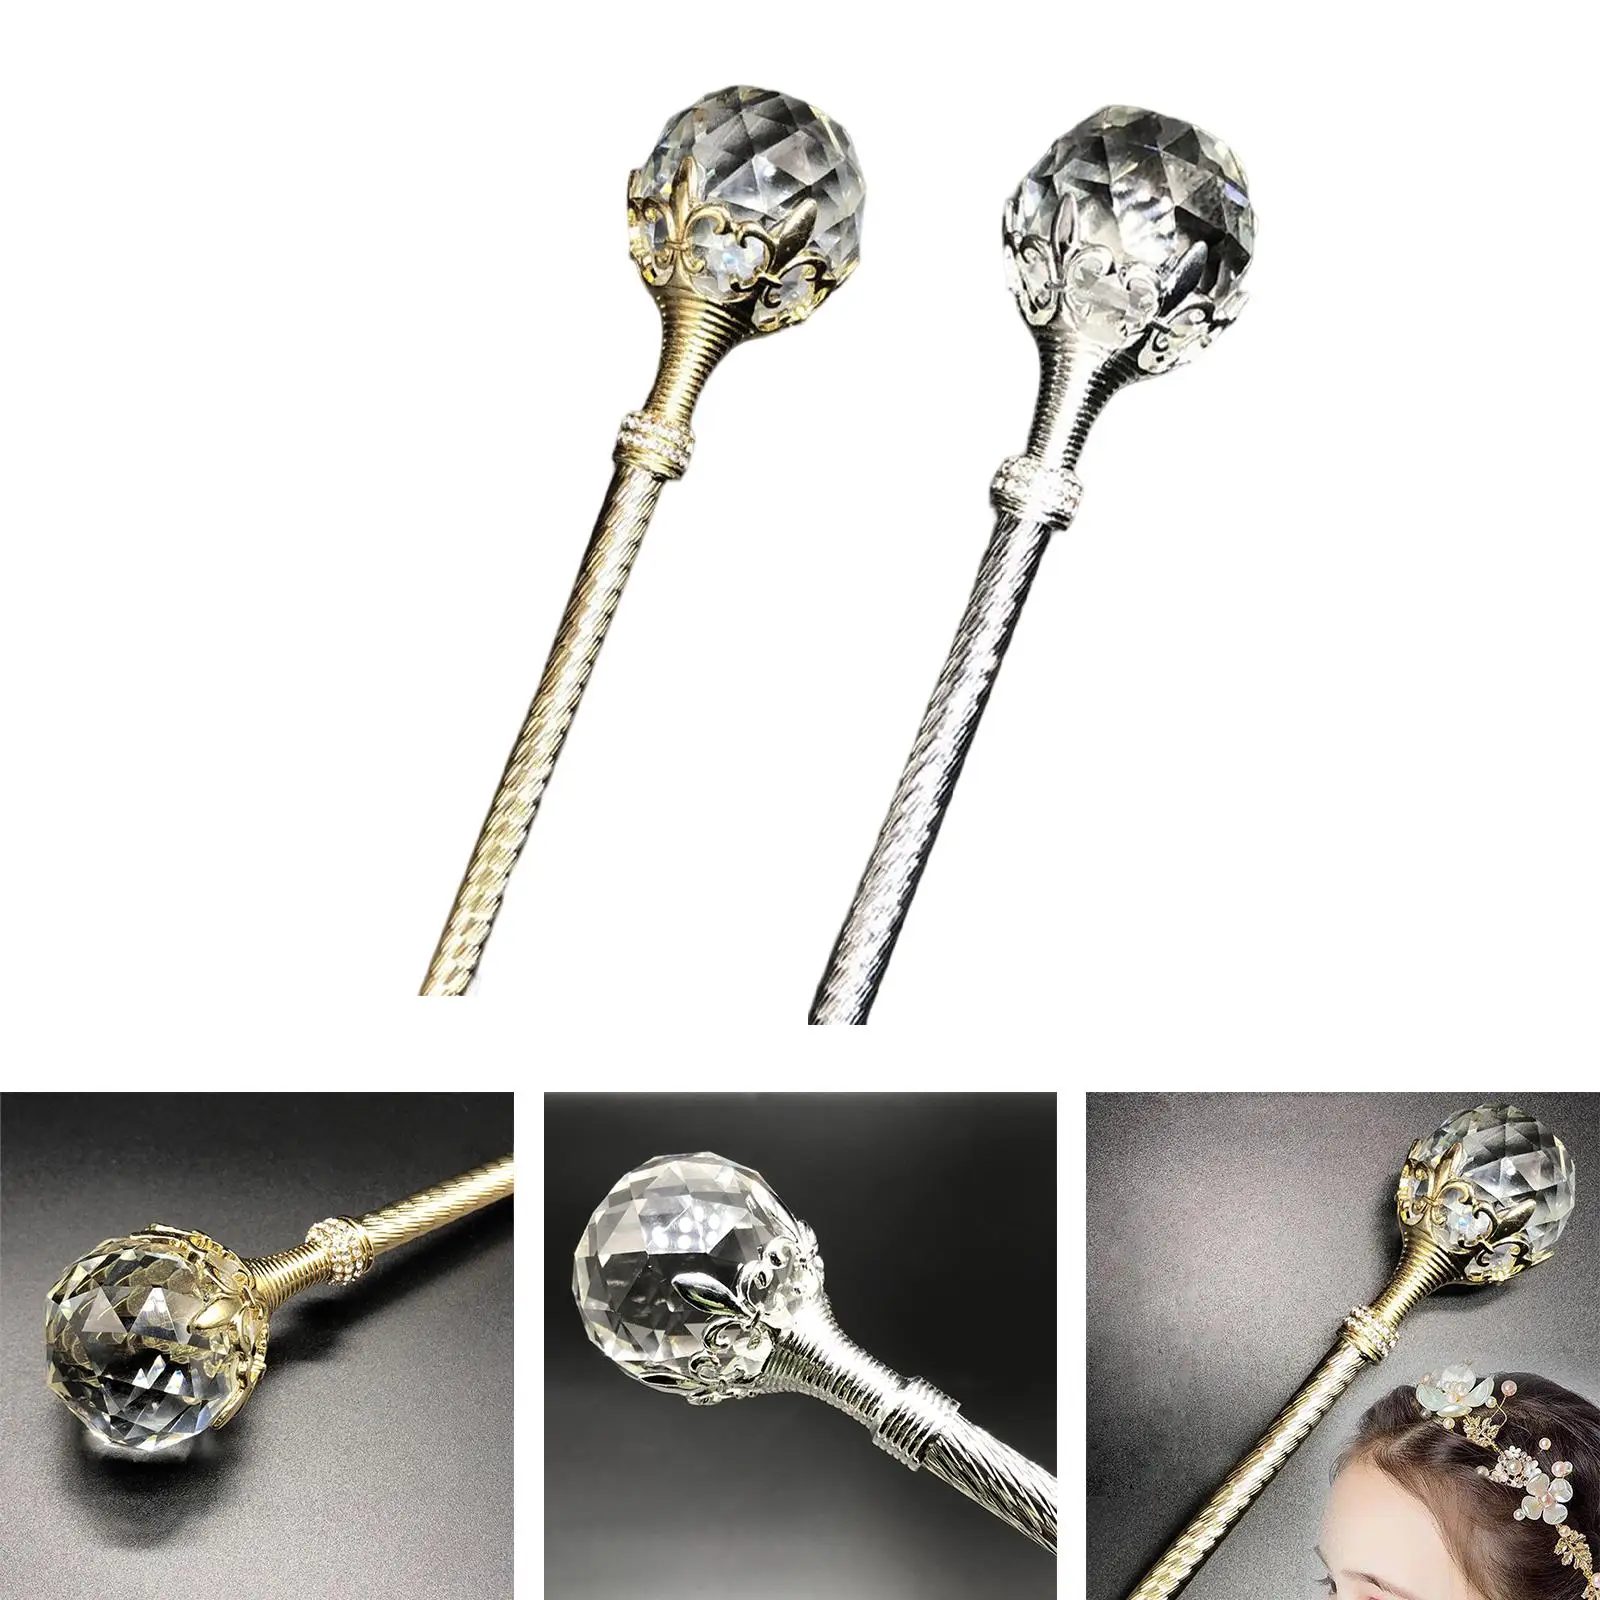 Queen Scepter Wand Fairy Crystal Ball  Wand Princess Scepter Cane Props for Prom Stage Party Kids Costume Decorations